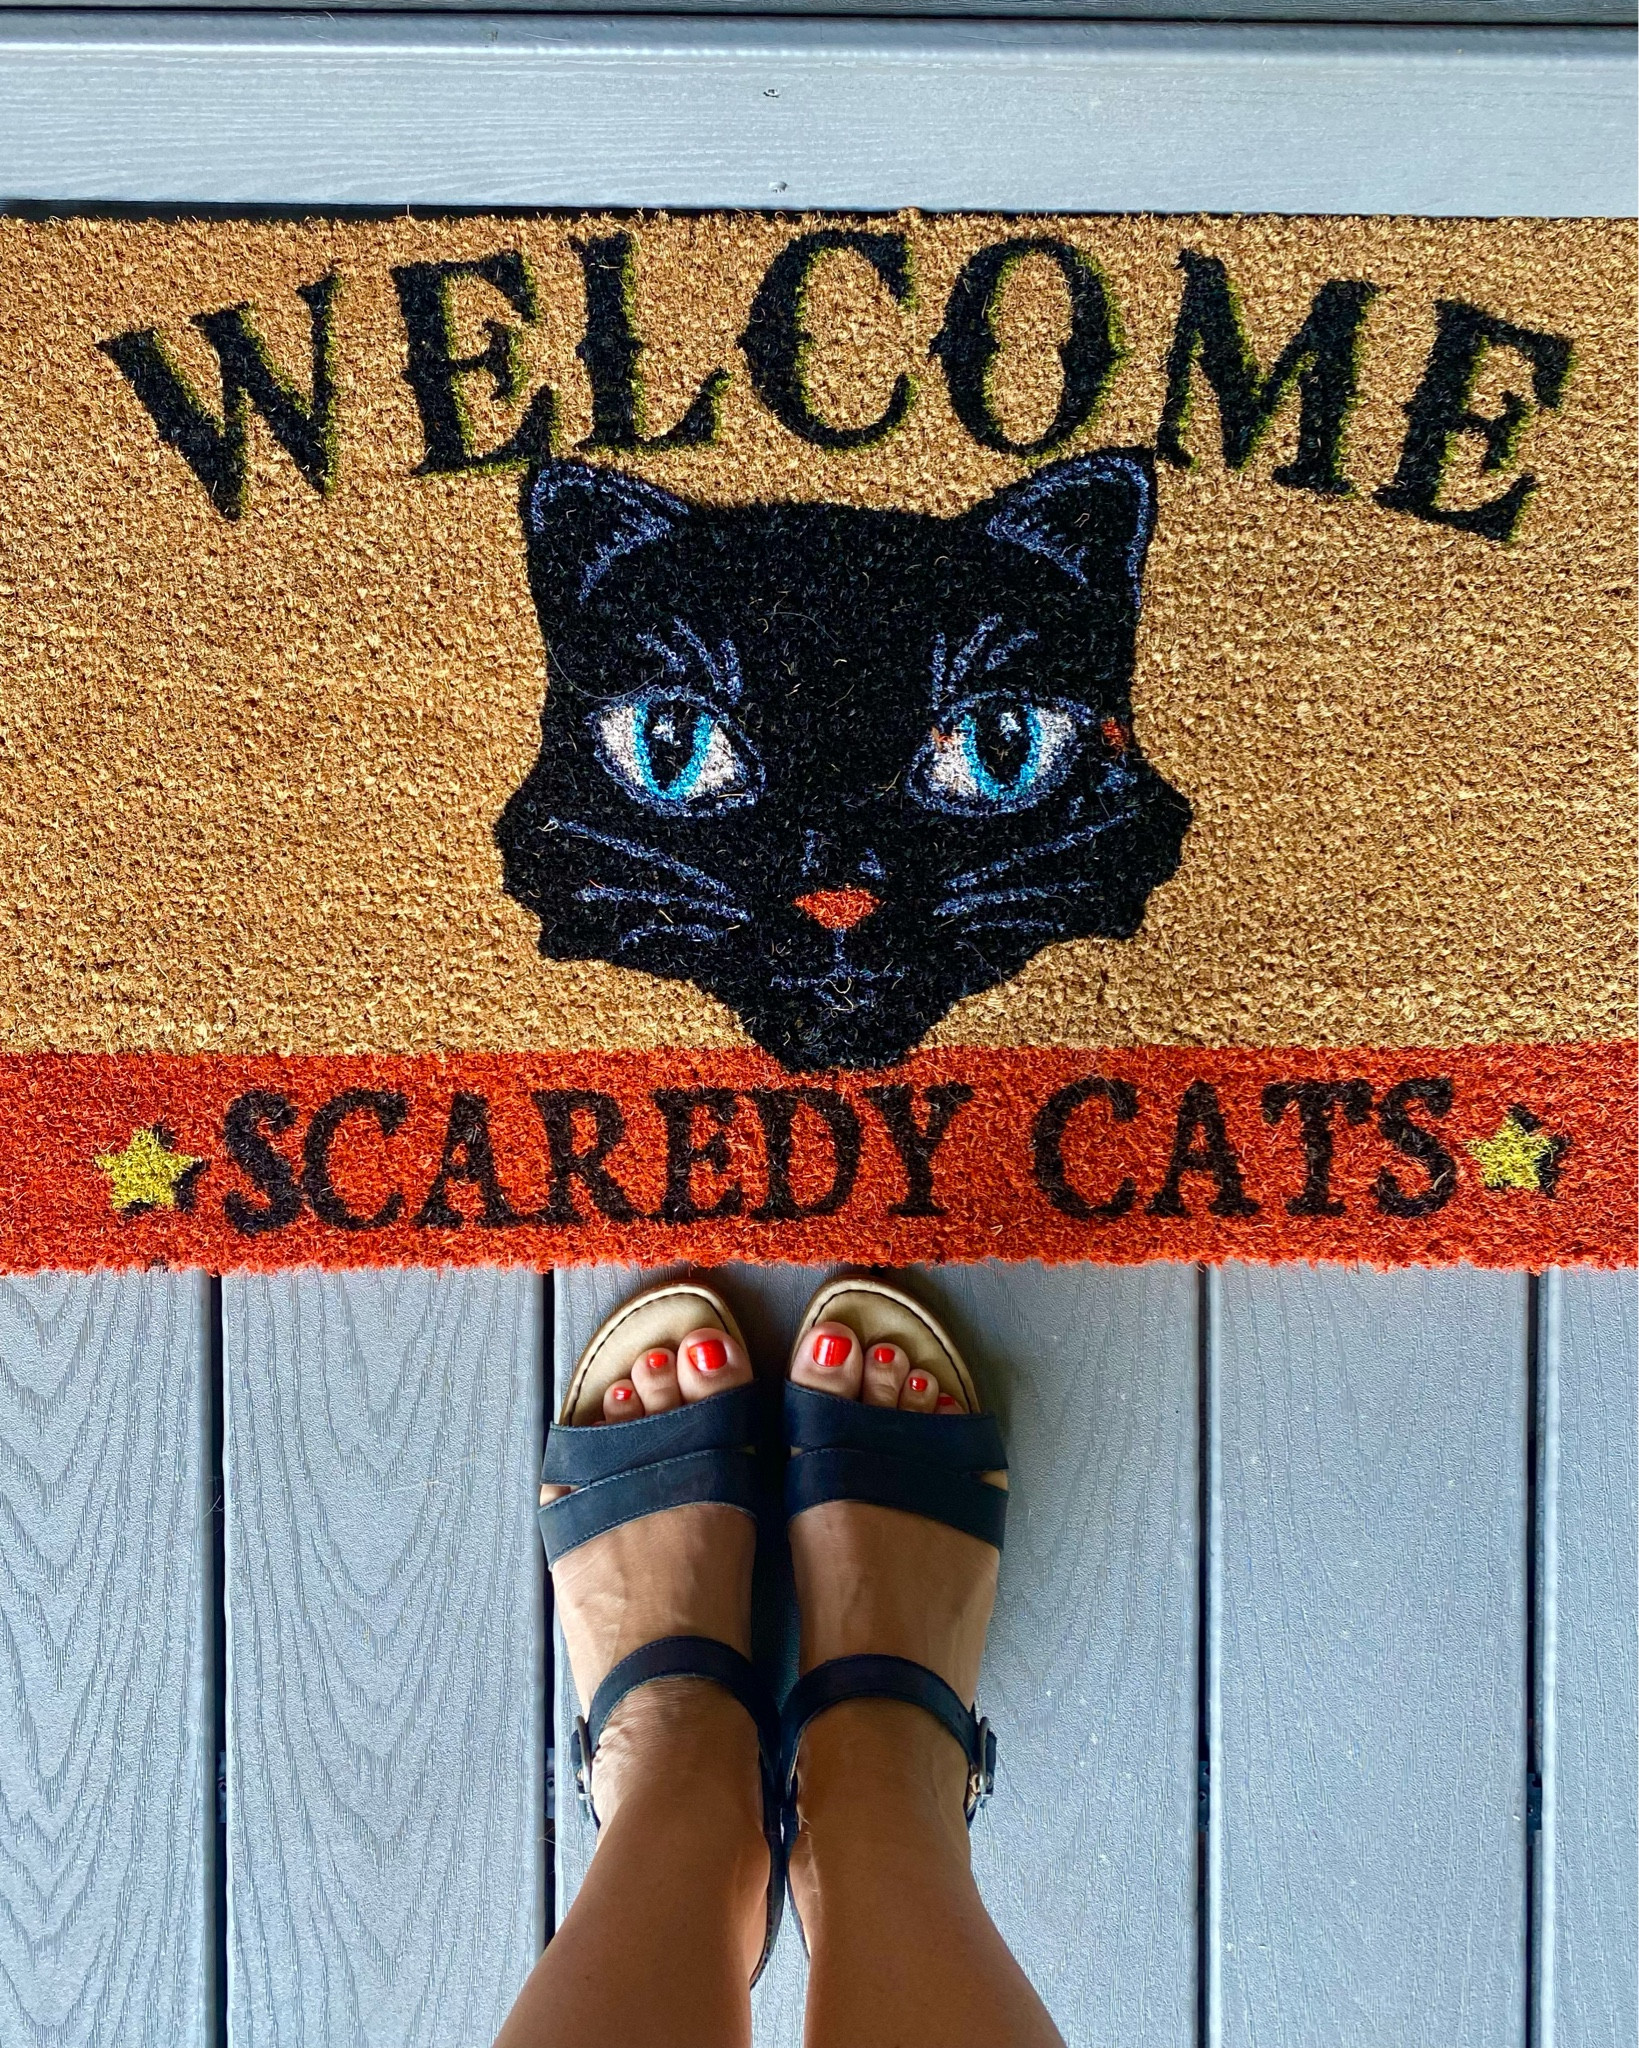 Scaredy Cats Welcome Sign. 